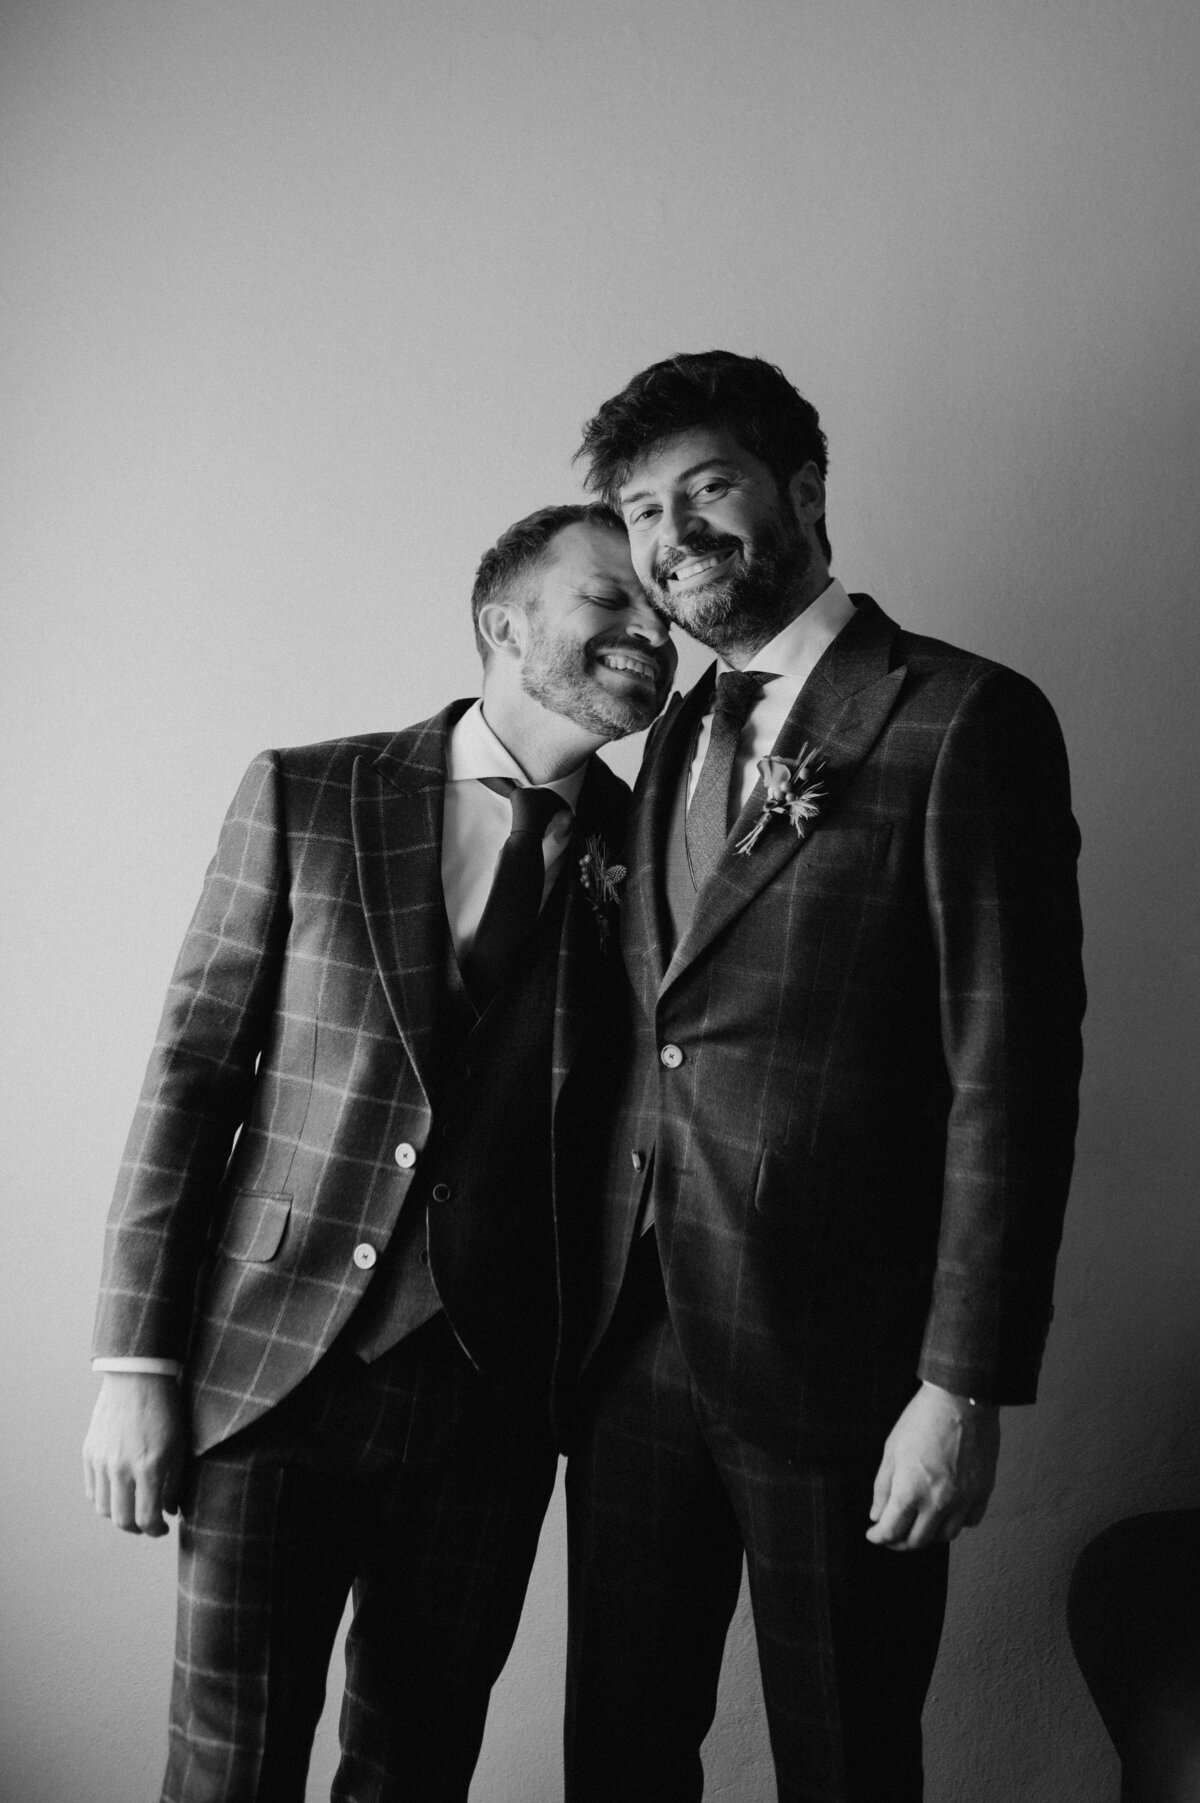 Groom and groom laughing together